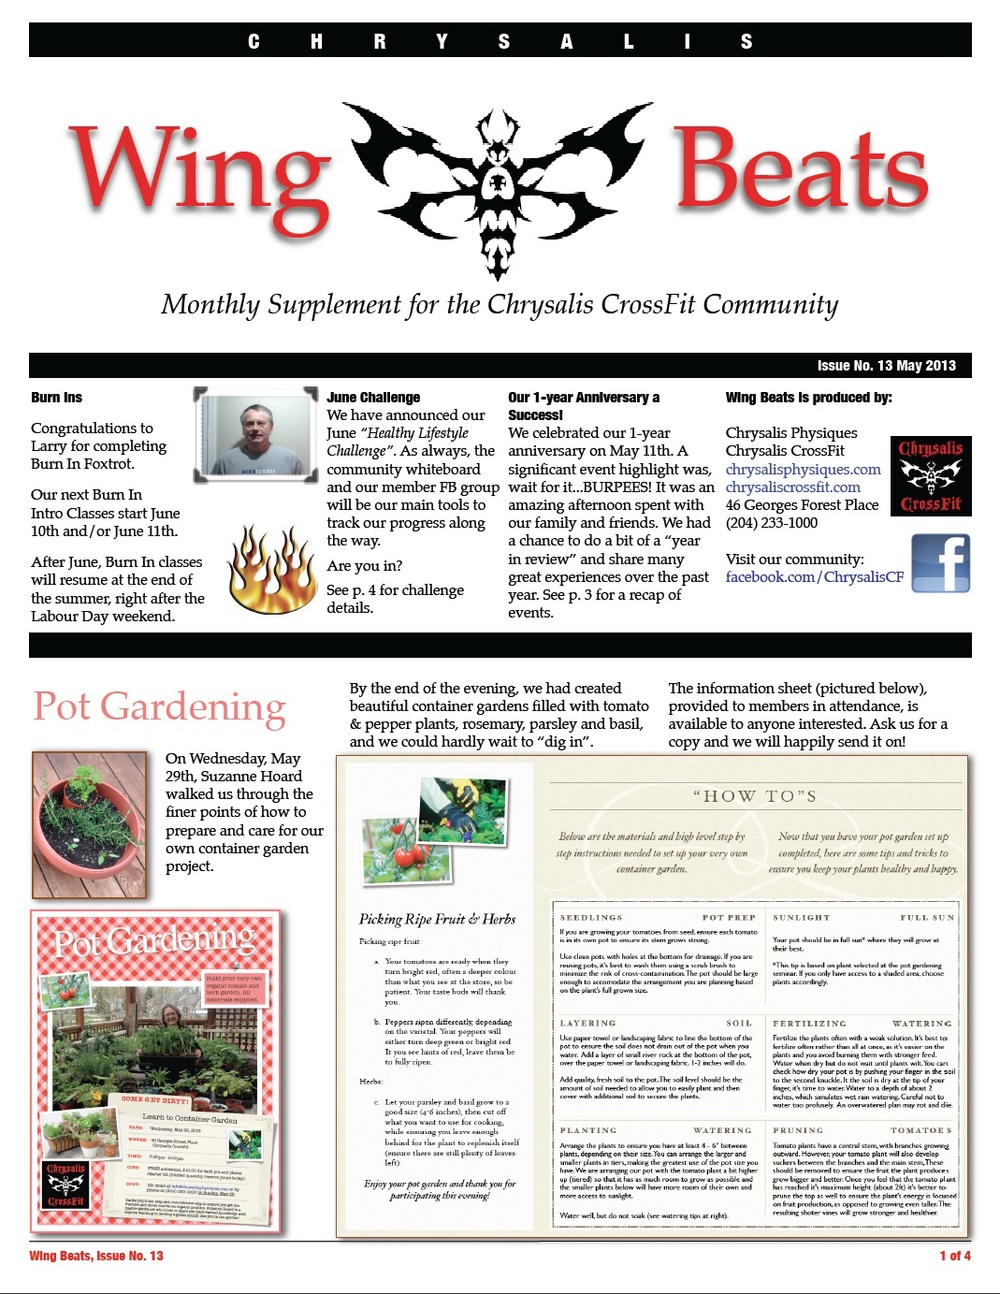 WingBeats Issue #13 - May 2013